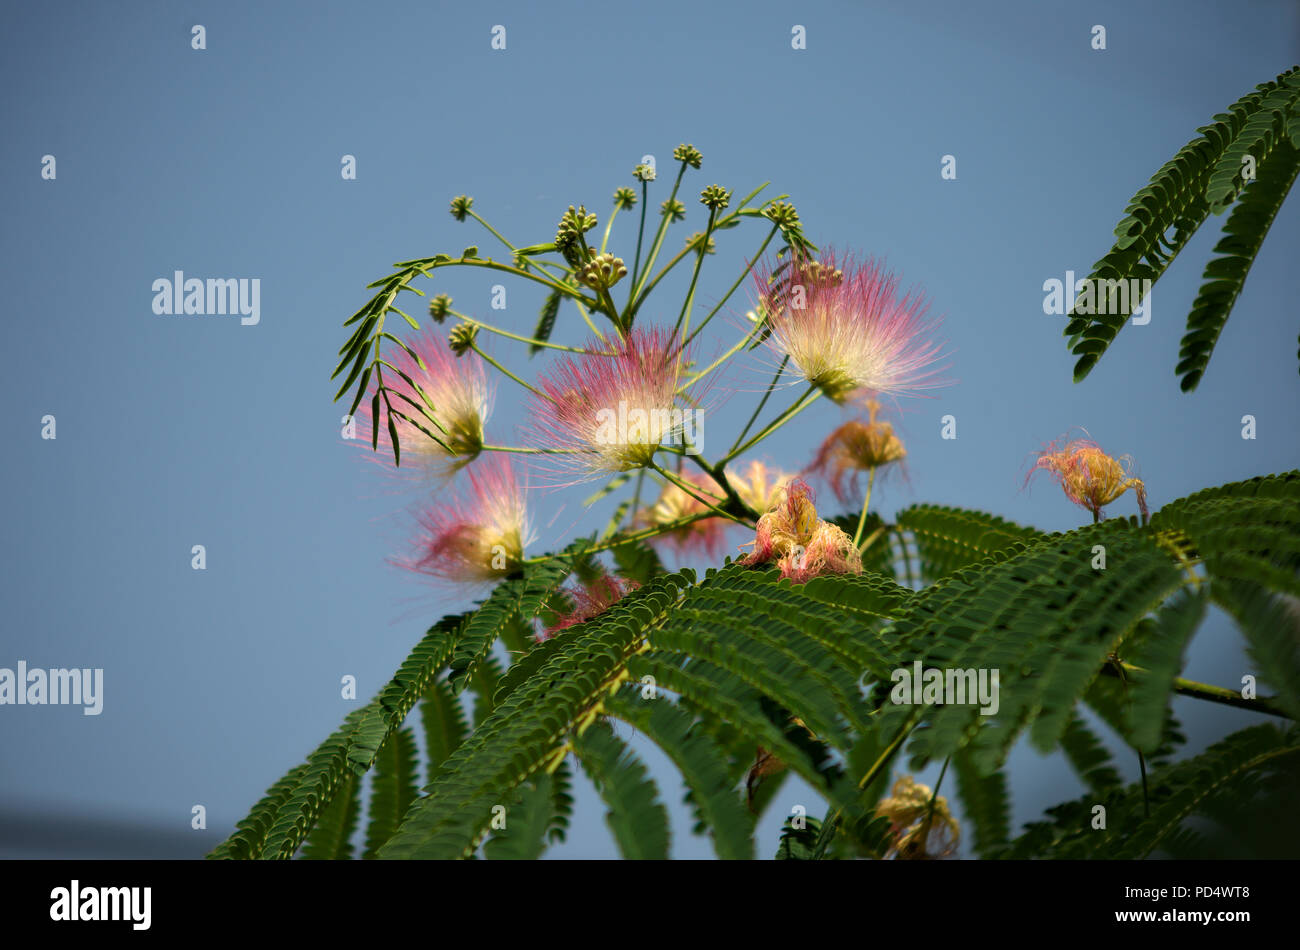 Fern like tree blooming with white and pink flowers, closeup Stock Photo